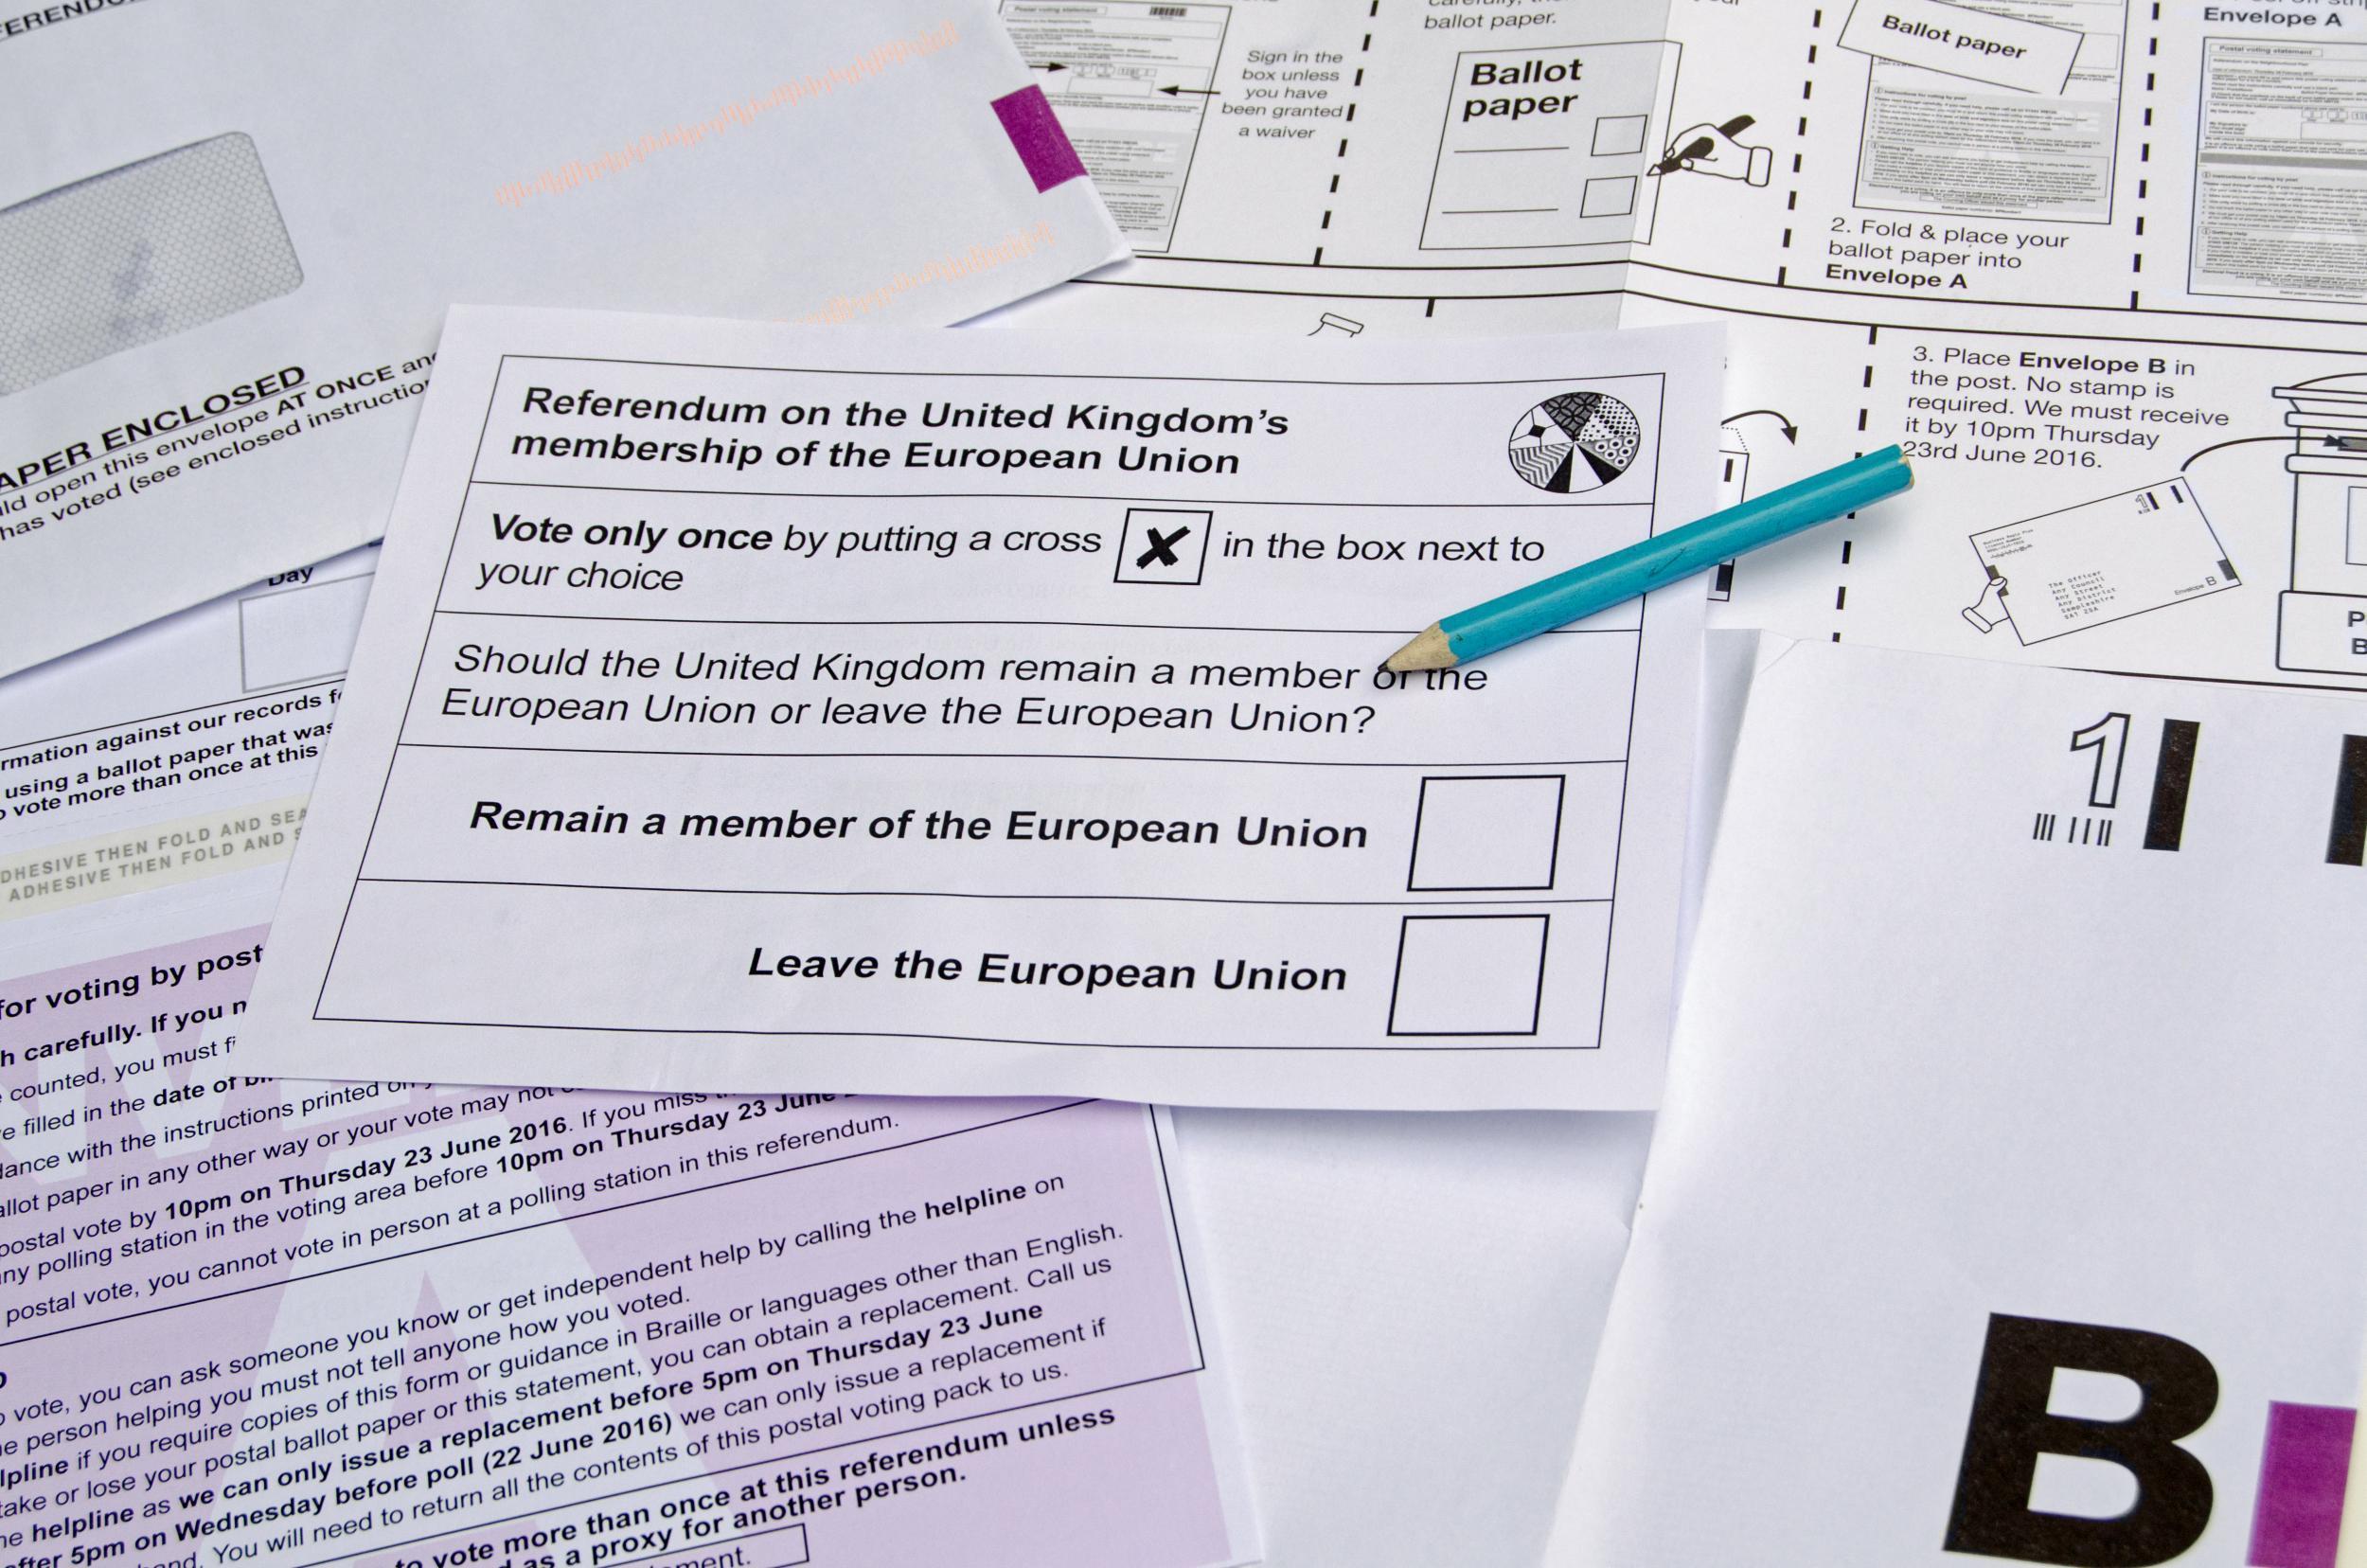 One option would be to reuse the ballot paper from 2016